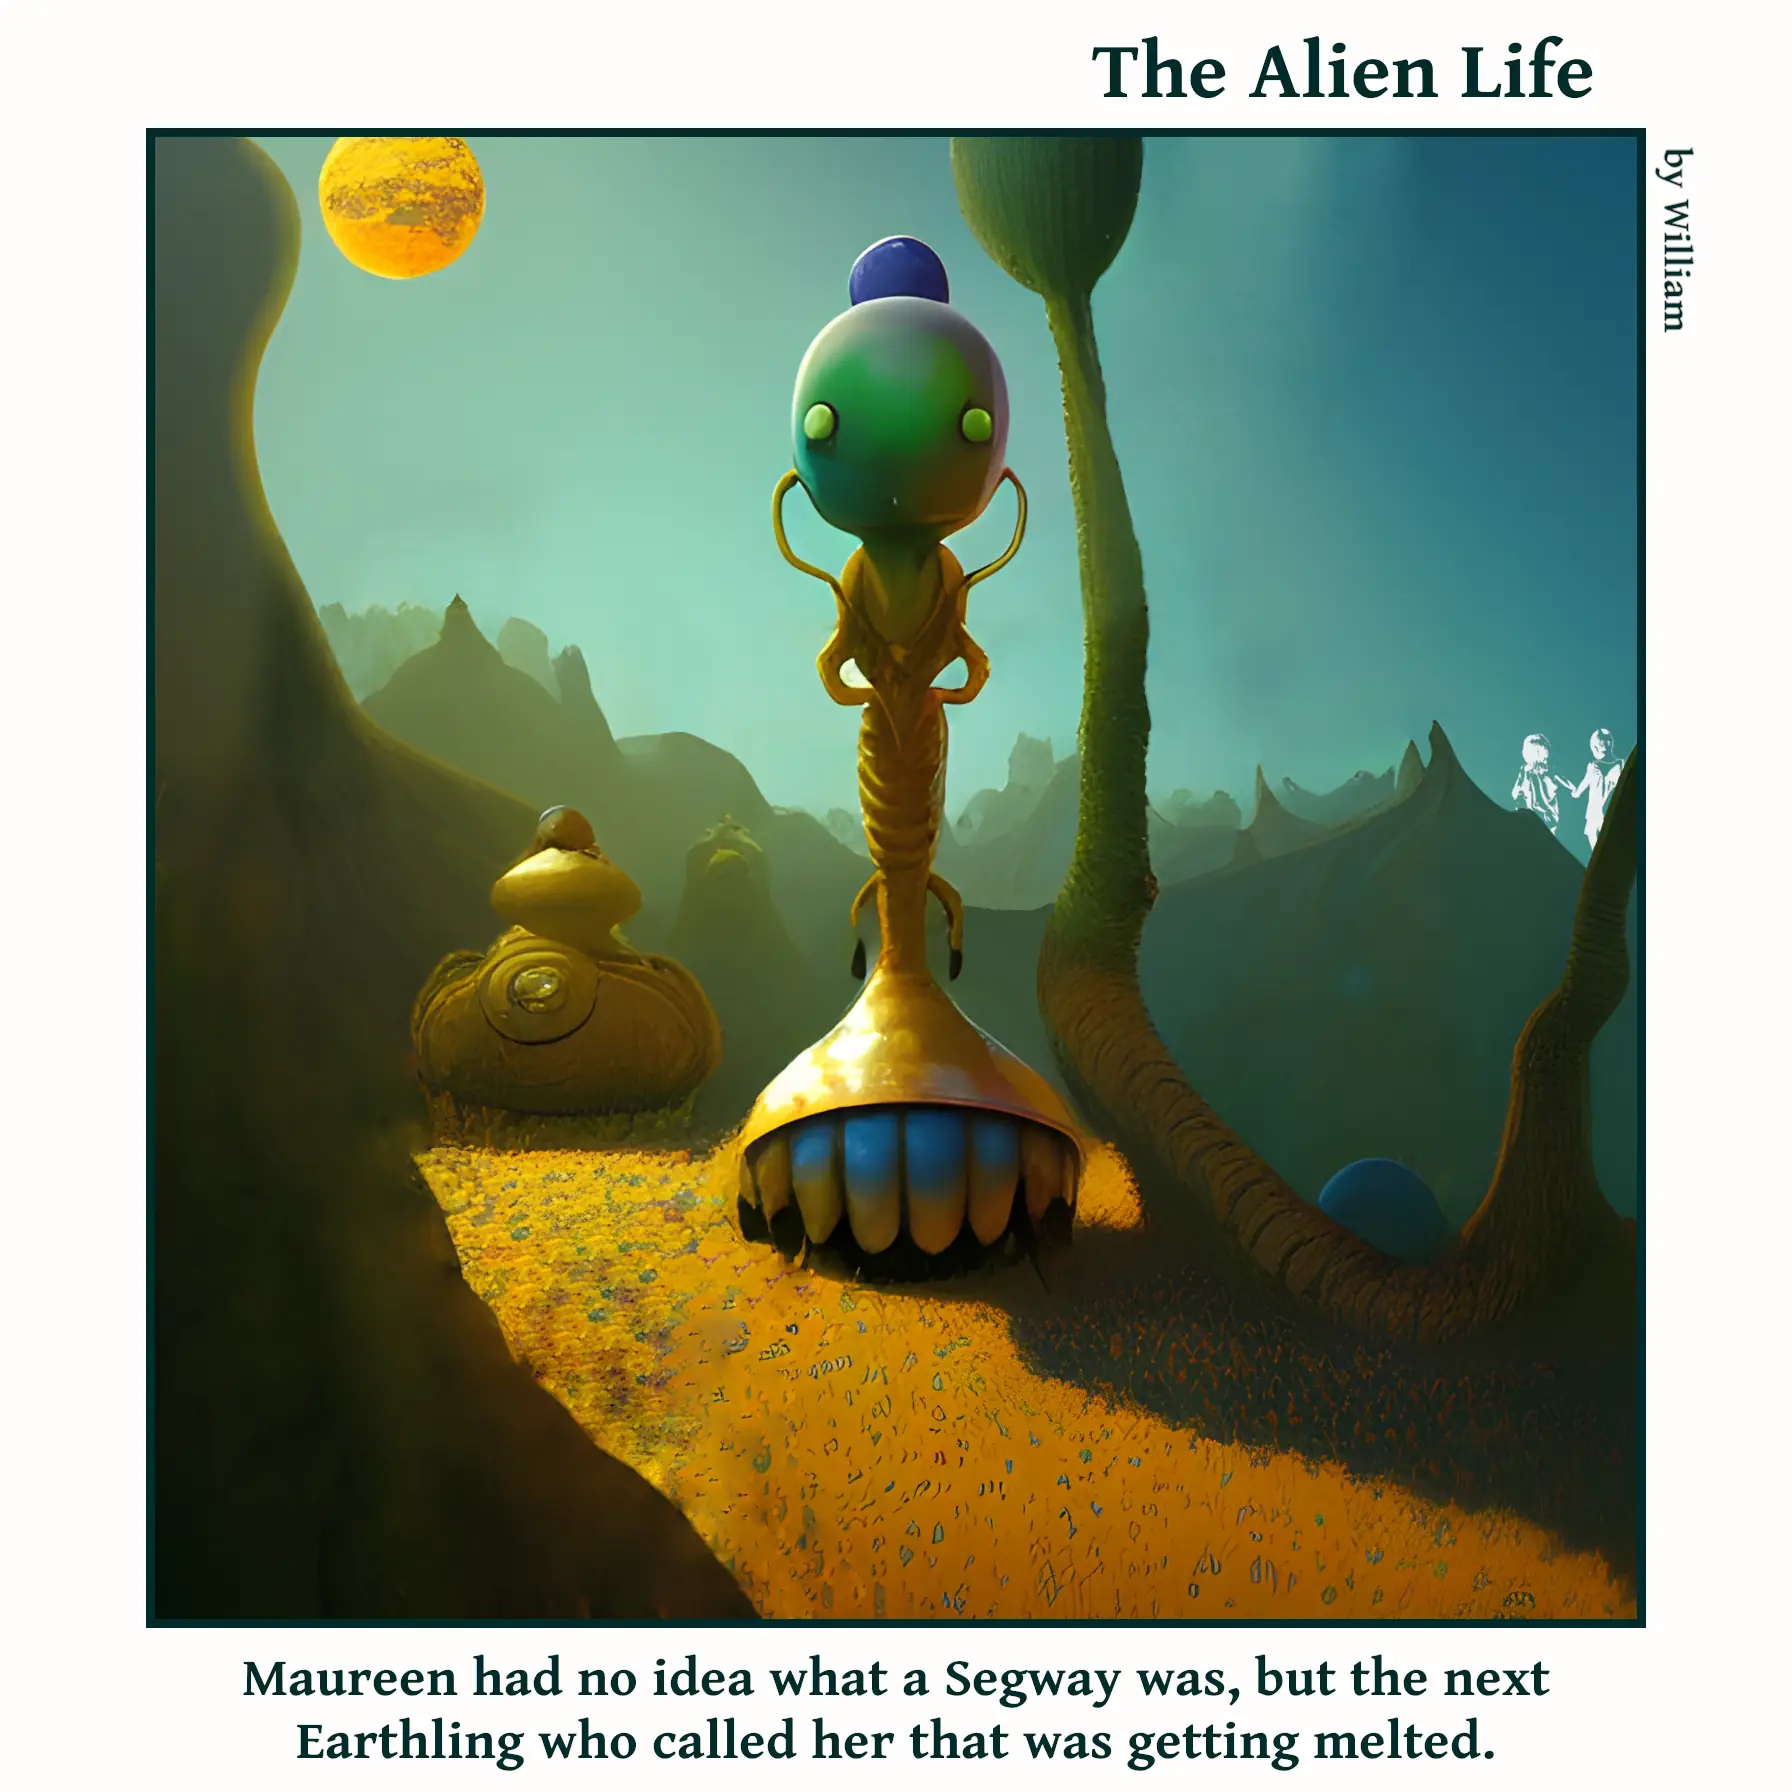 An alien whose lower body has a Segway look to it is on a path. The caption reads: Maureen had no idea what a Segway was, but the next Earthling who called her that was getting melted.